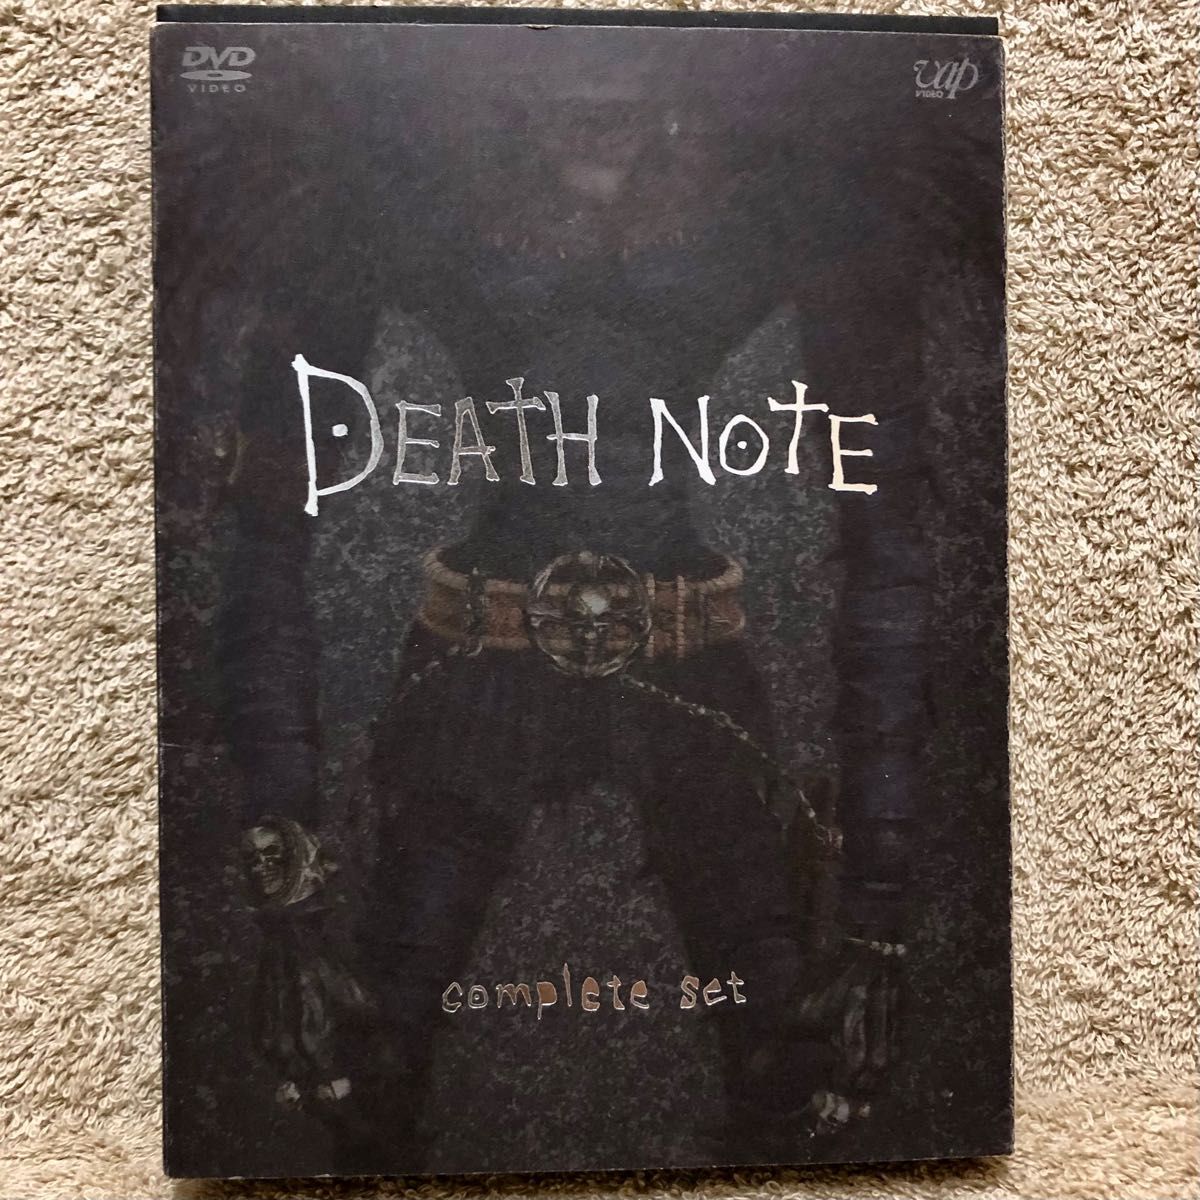 DEATH NOTE the Last name complete set [DVD]